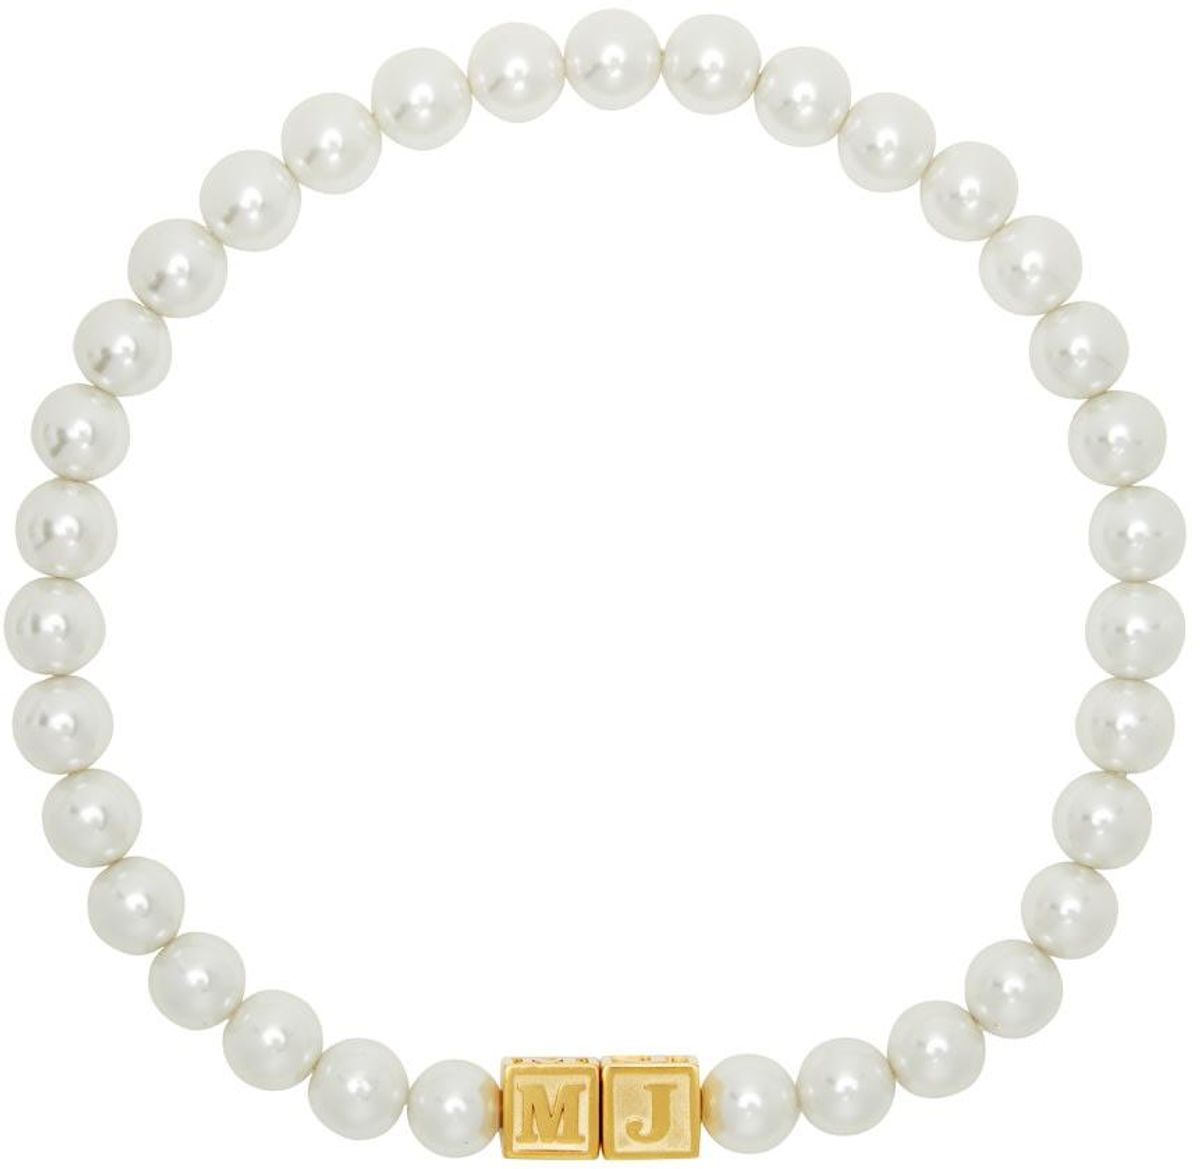 “The Pearl” Necklace